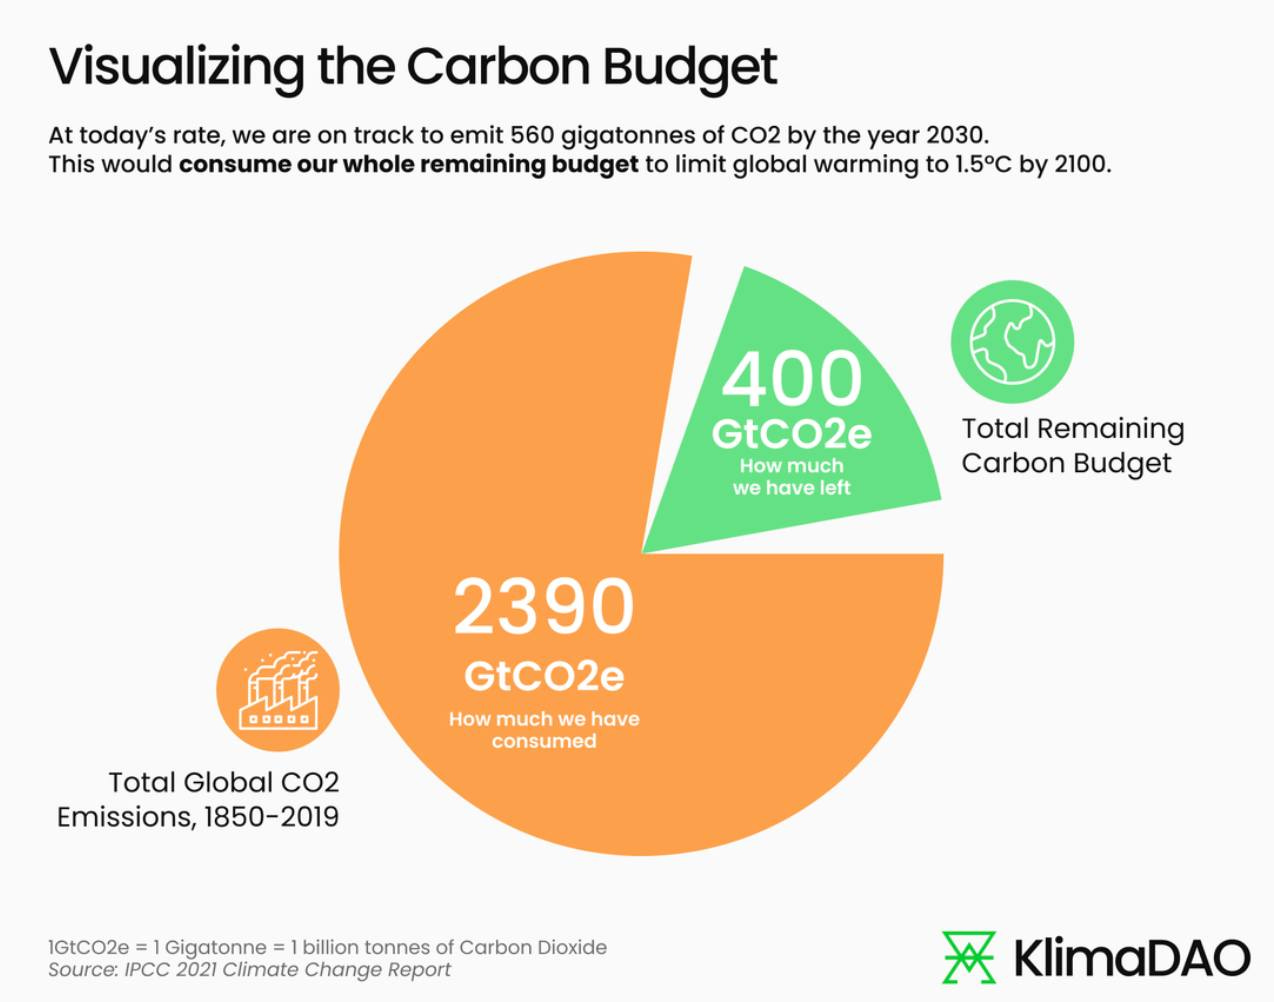 May be an image of ‎text that says "‎Visualizing the Carbon Budget At today's rate, we are on track to emit 560 gigatonnes of CO2 by the year 2030. This would consume our whole remaining budget to limit global warming to 1.5℃ by 2100. 400 GtCO2e How much we have left Total Remaining Carbon Budget ባii ם×××× 2390 GtCO2e How much have consumed Total Global CO2 Emissions, 1850-2019 1GtCO2e Gigatonne =1 billion tonnes of Carbon Dioxide Source: IPCC 2021 Climate Change Report 买 KlimaDAO‎"‎